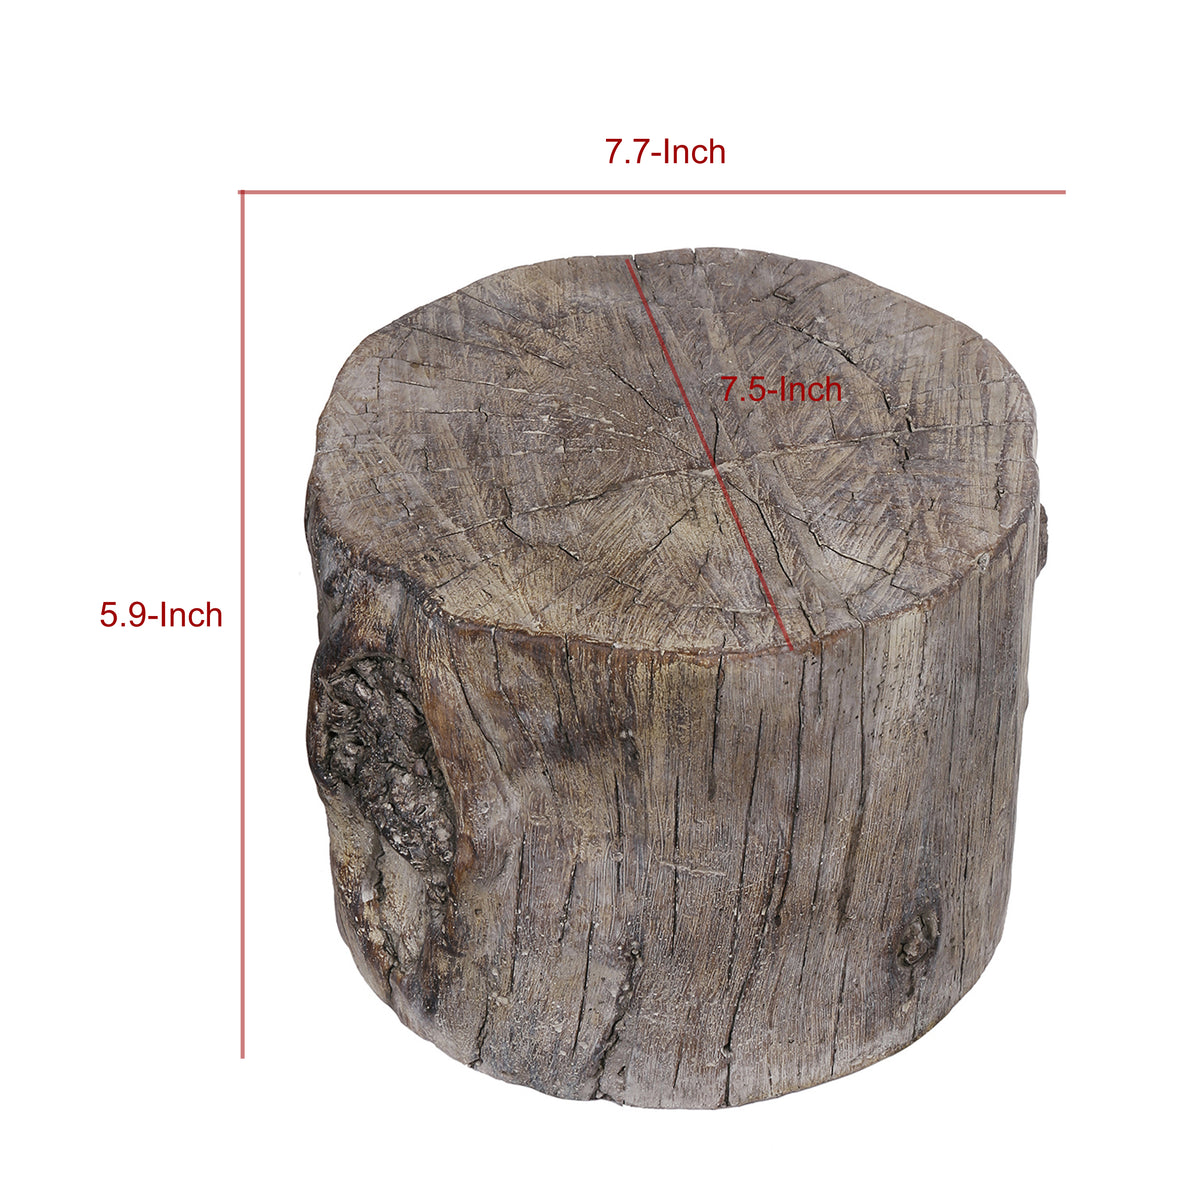 Cement Tree Stump Stool in Round Shape, Small, Brown - BM177185